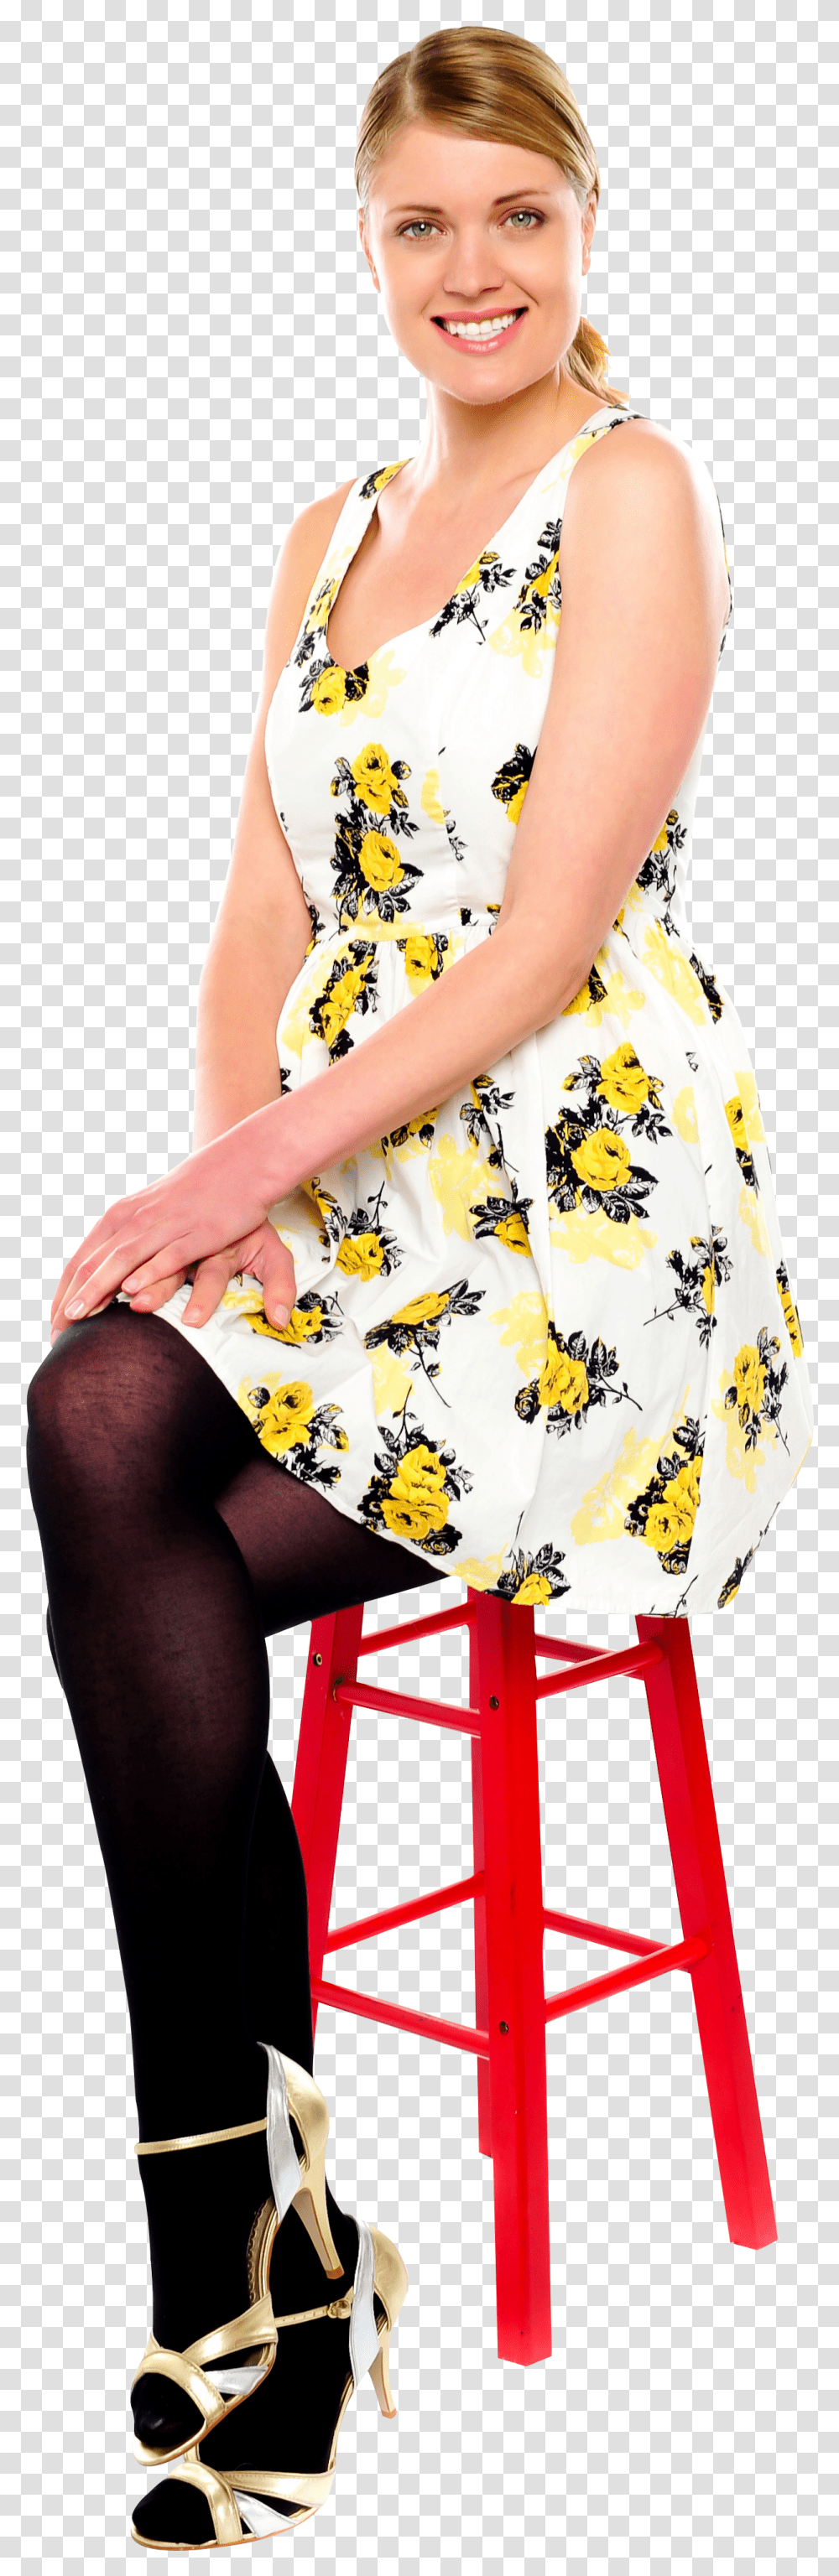 Woman Sitting On Stool Transparent Png